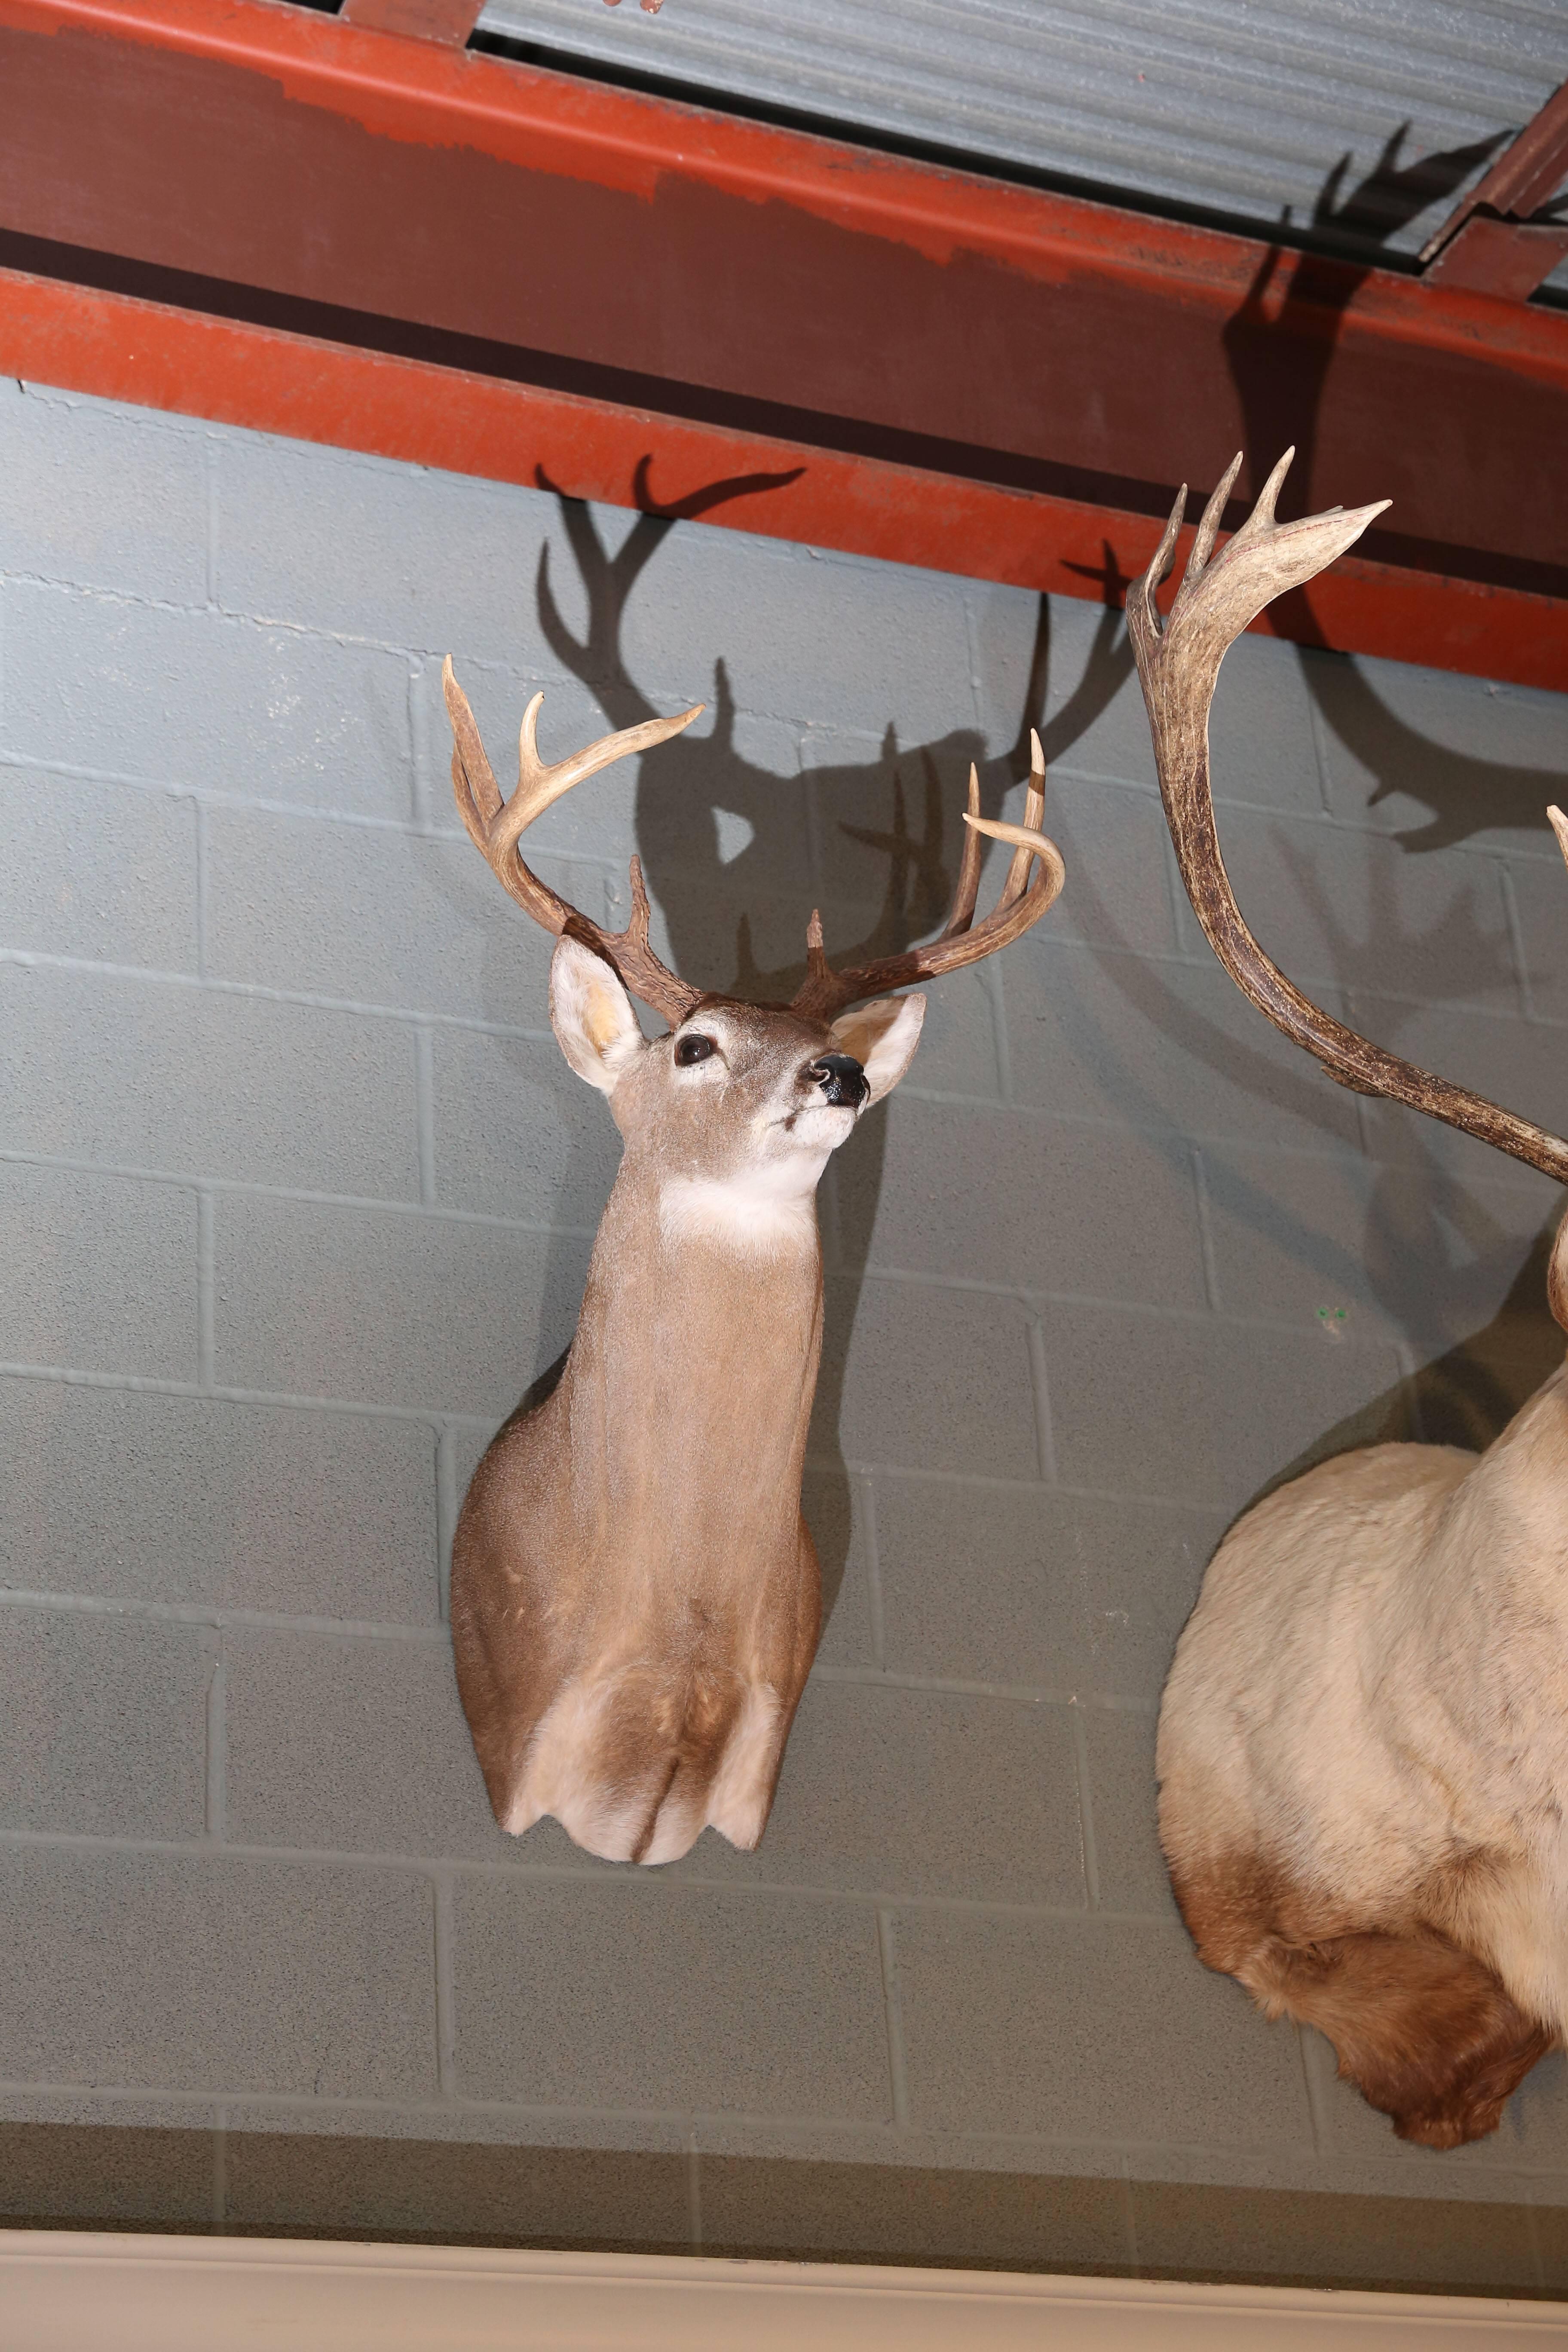 Flanking Caribou are two White-Tail deer.
Both approx. 36h x 22w x 22d
$1,000.00 each

Magnificent Caribou Mount is 51h x 38d x 45w
$1,500.00 